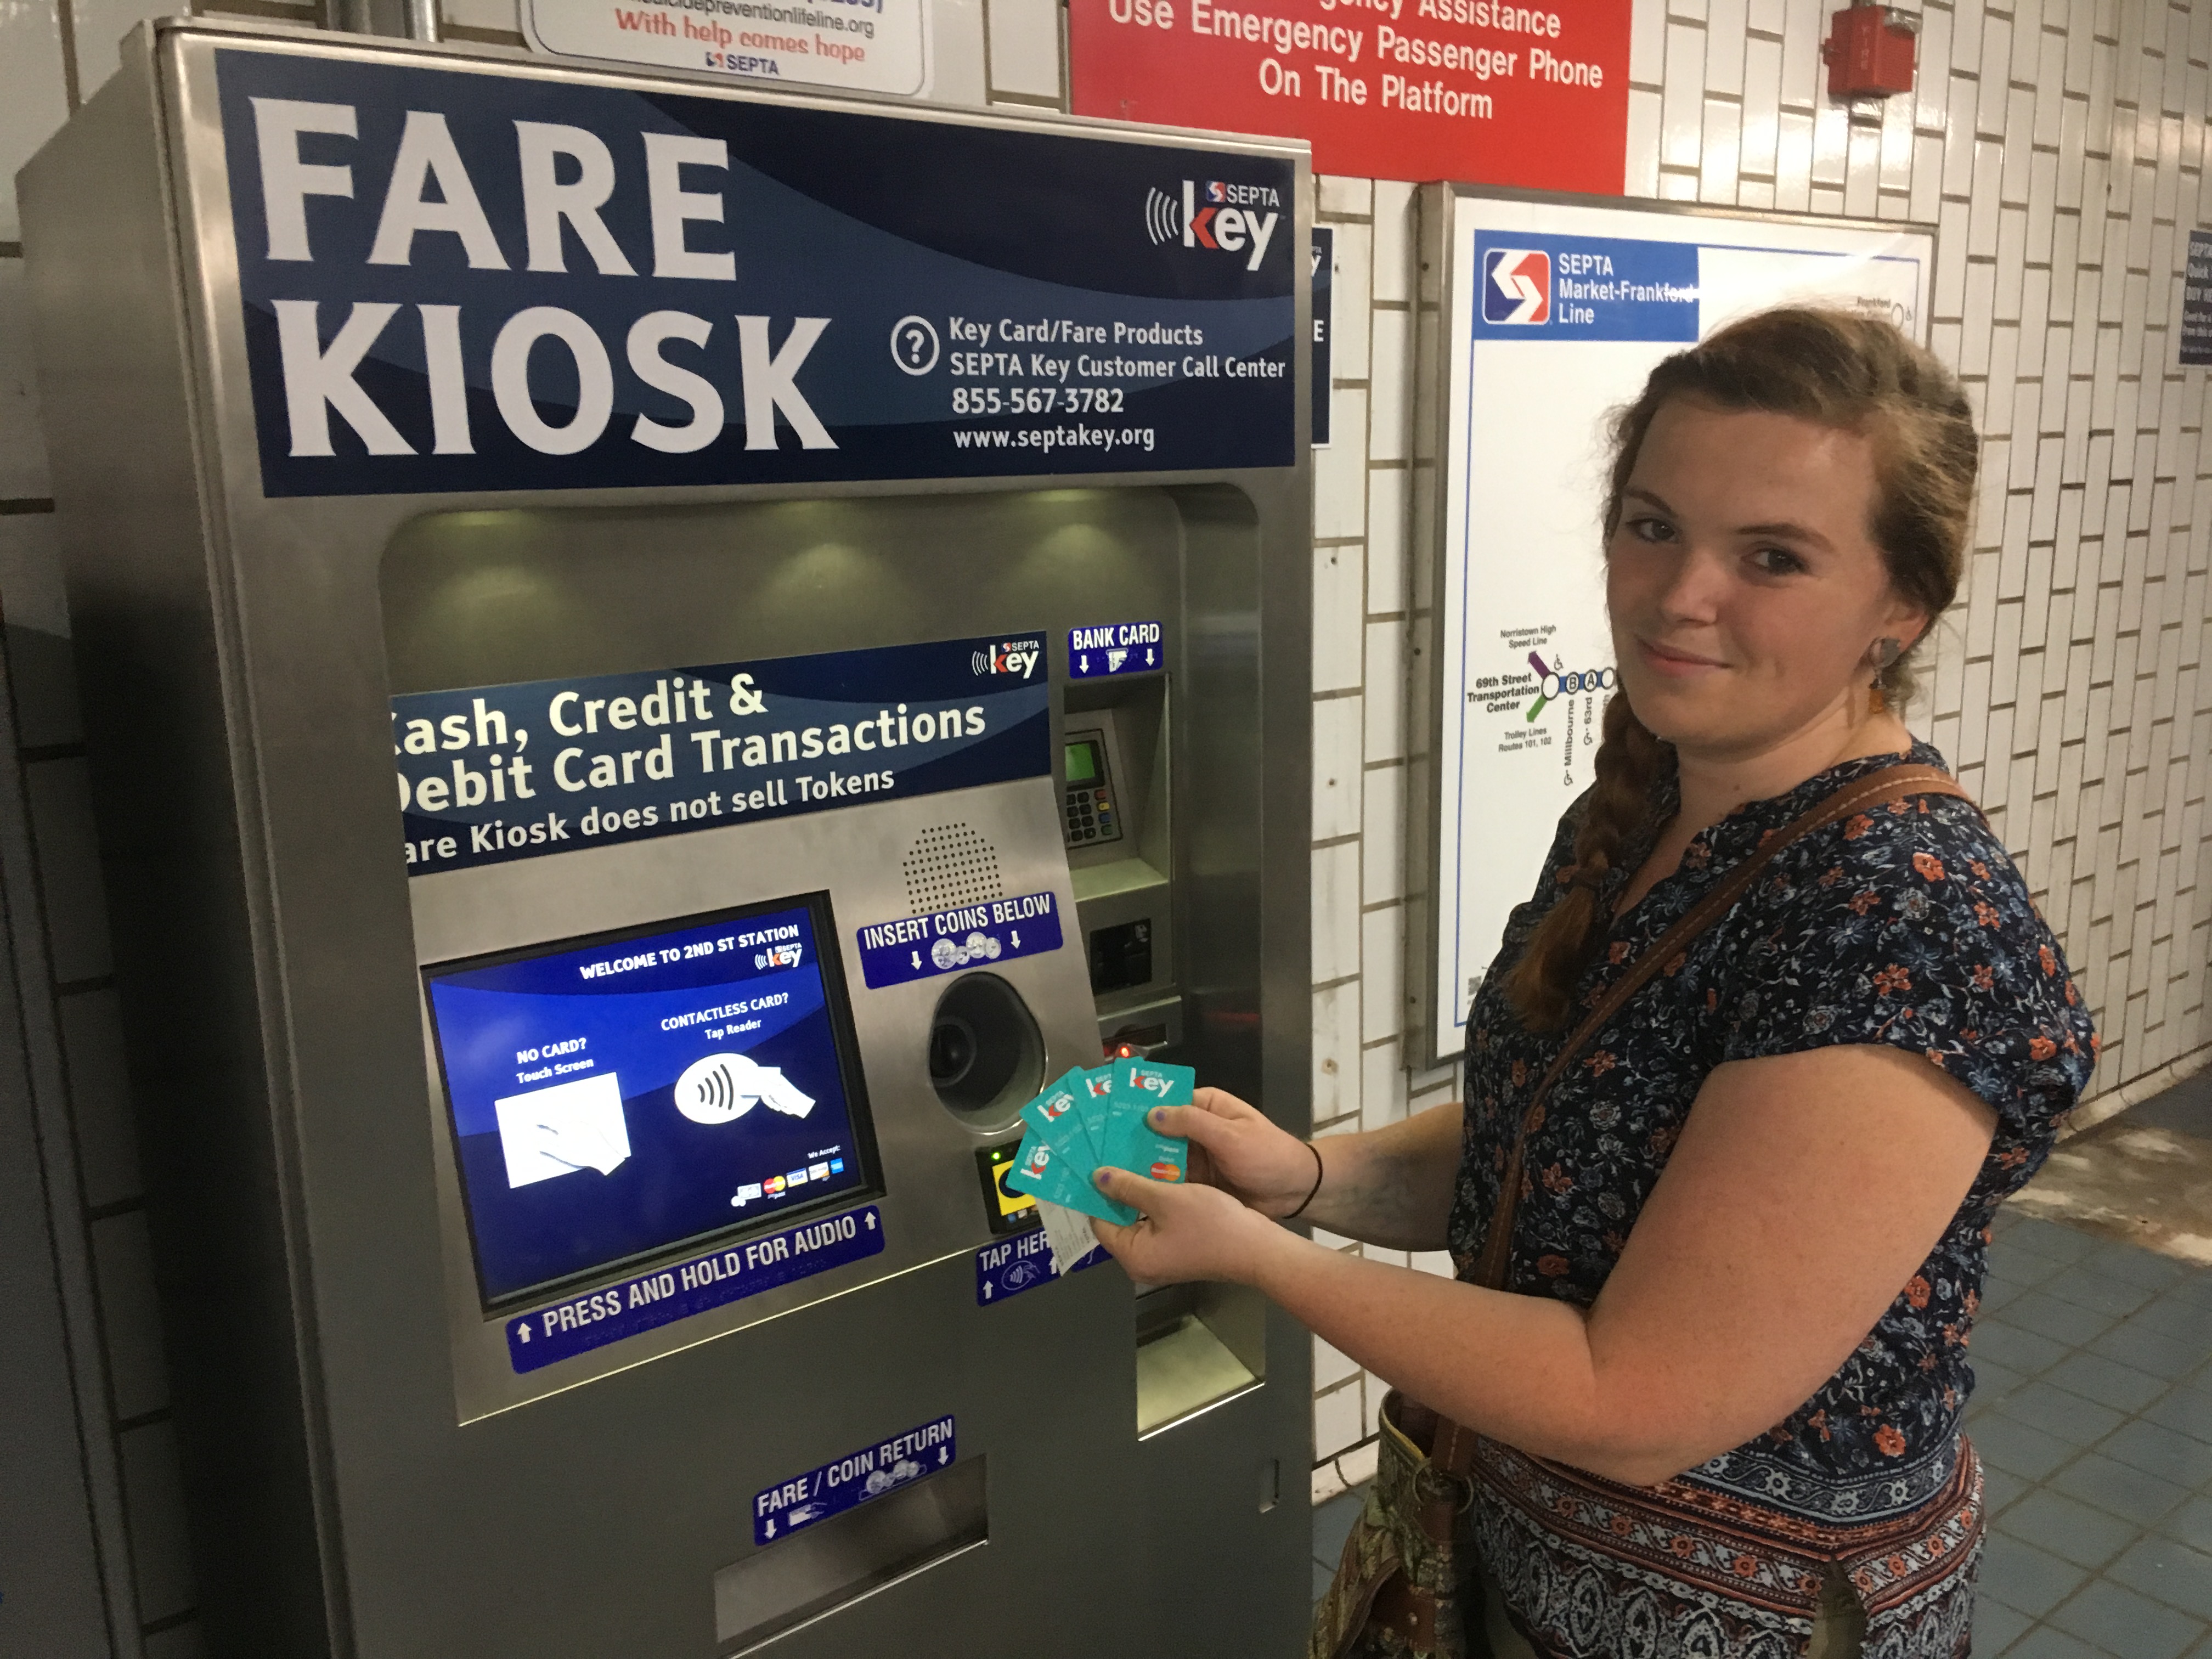 Just one of many riders who accidentally ordered multiple SEPTA Keys, Olivia Duffy with her four cards. 